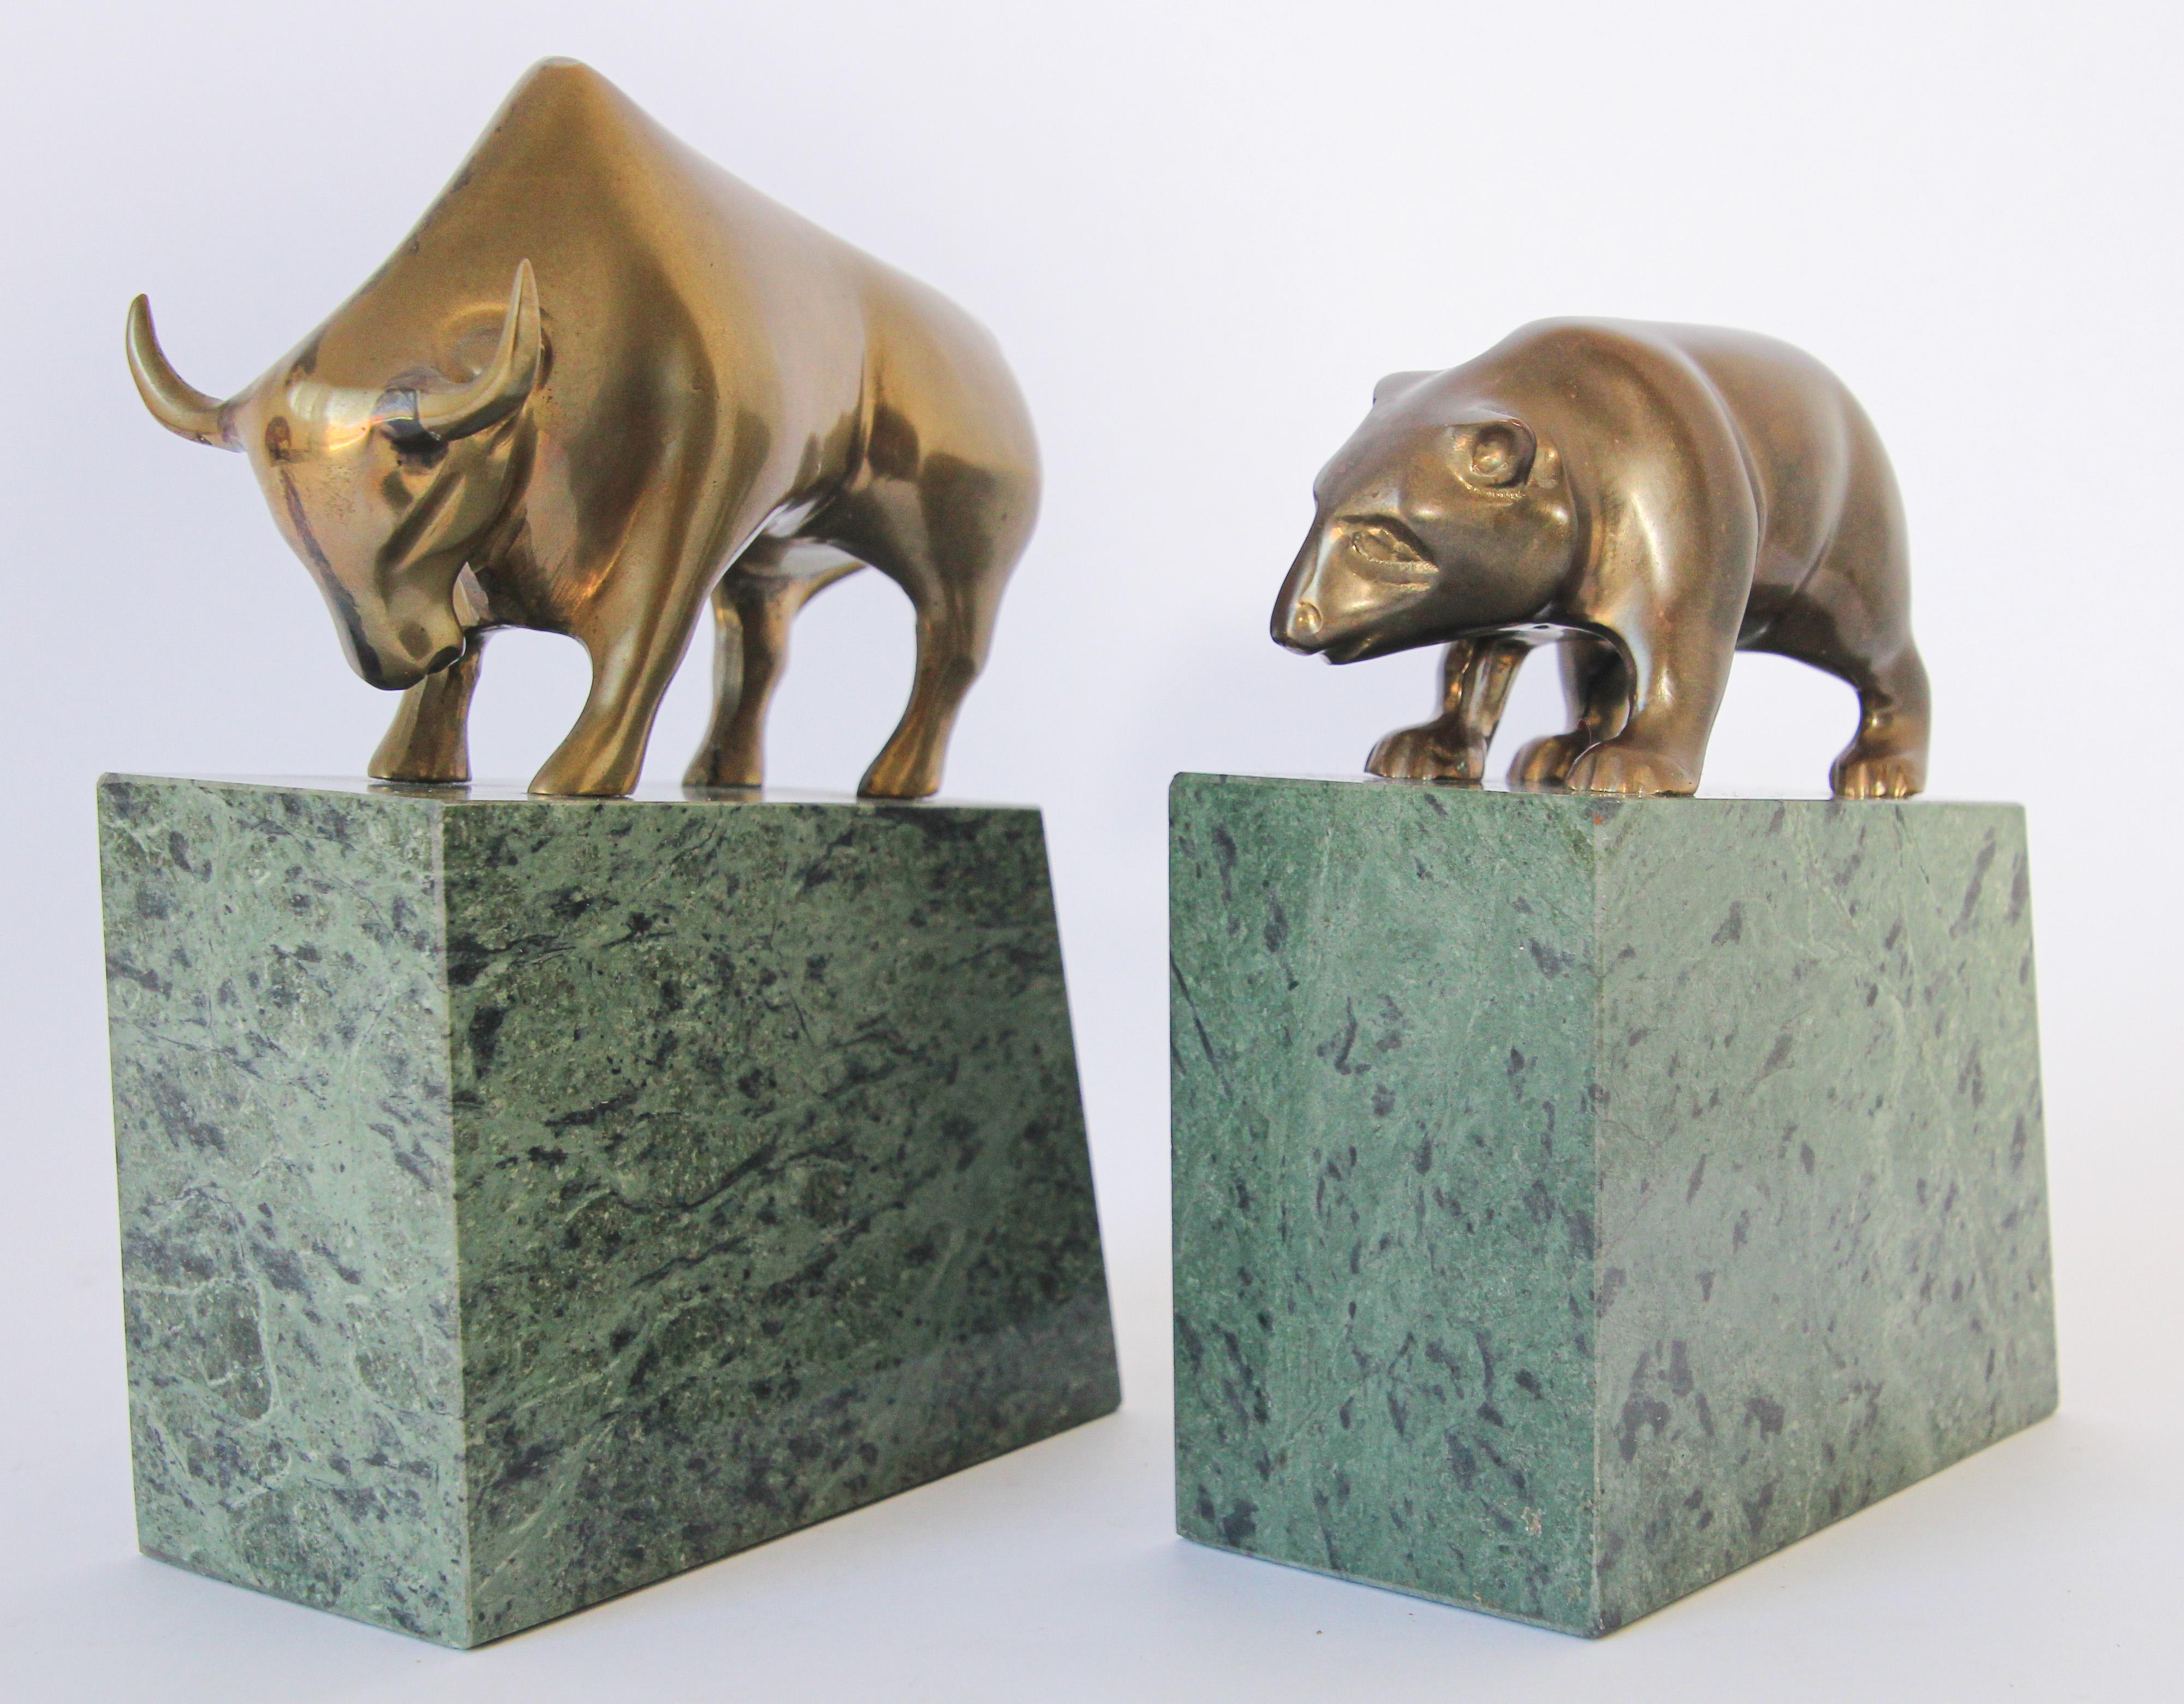 Vintage Art Deco style brass bull and bear bookends, paperweights.
This stunning vintage Wall Street bull and bear broker decorative desk decoration, bookends are just gorgeous. .
These polished Heavy cast brass bull and bear bookends animals are